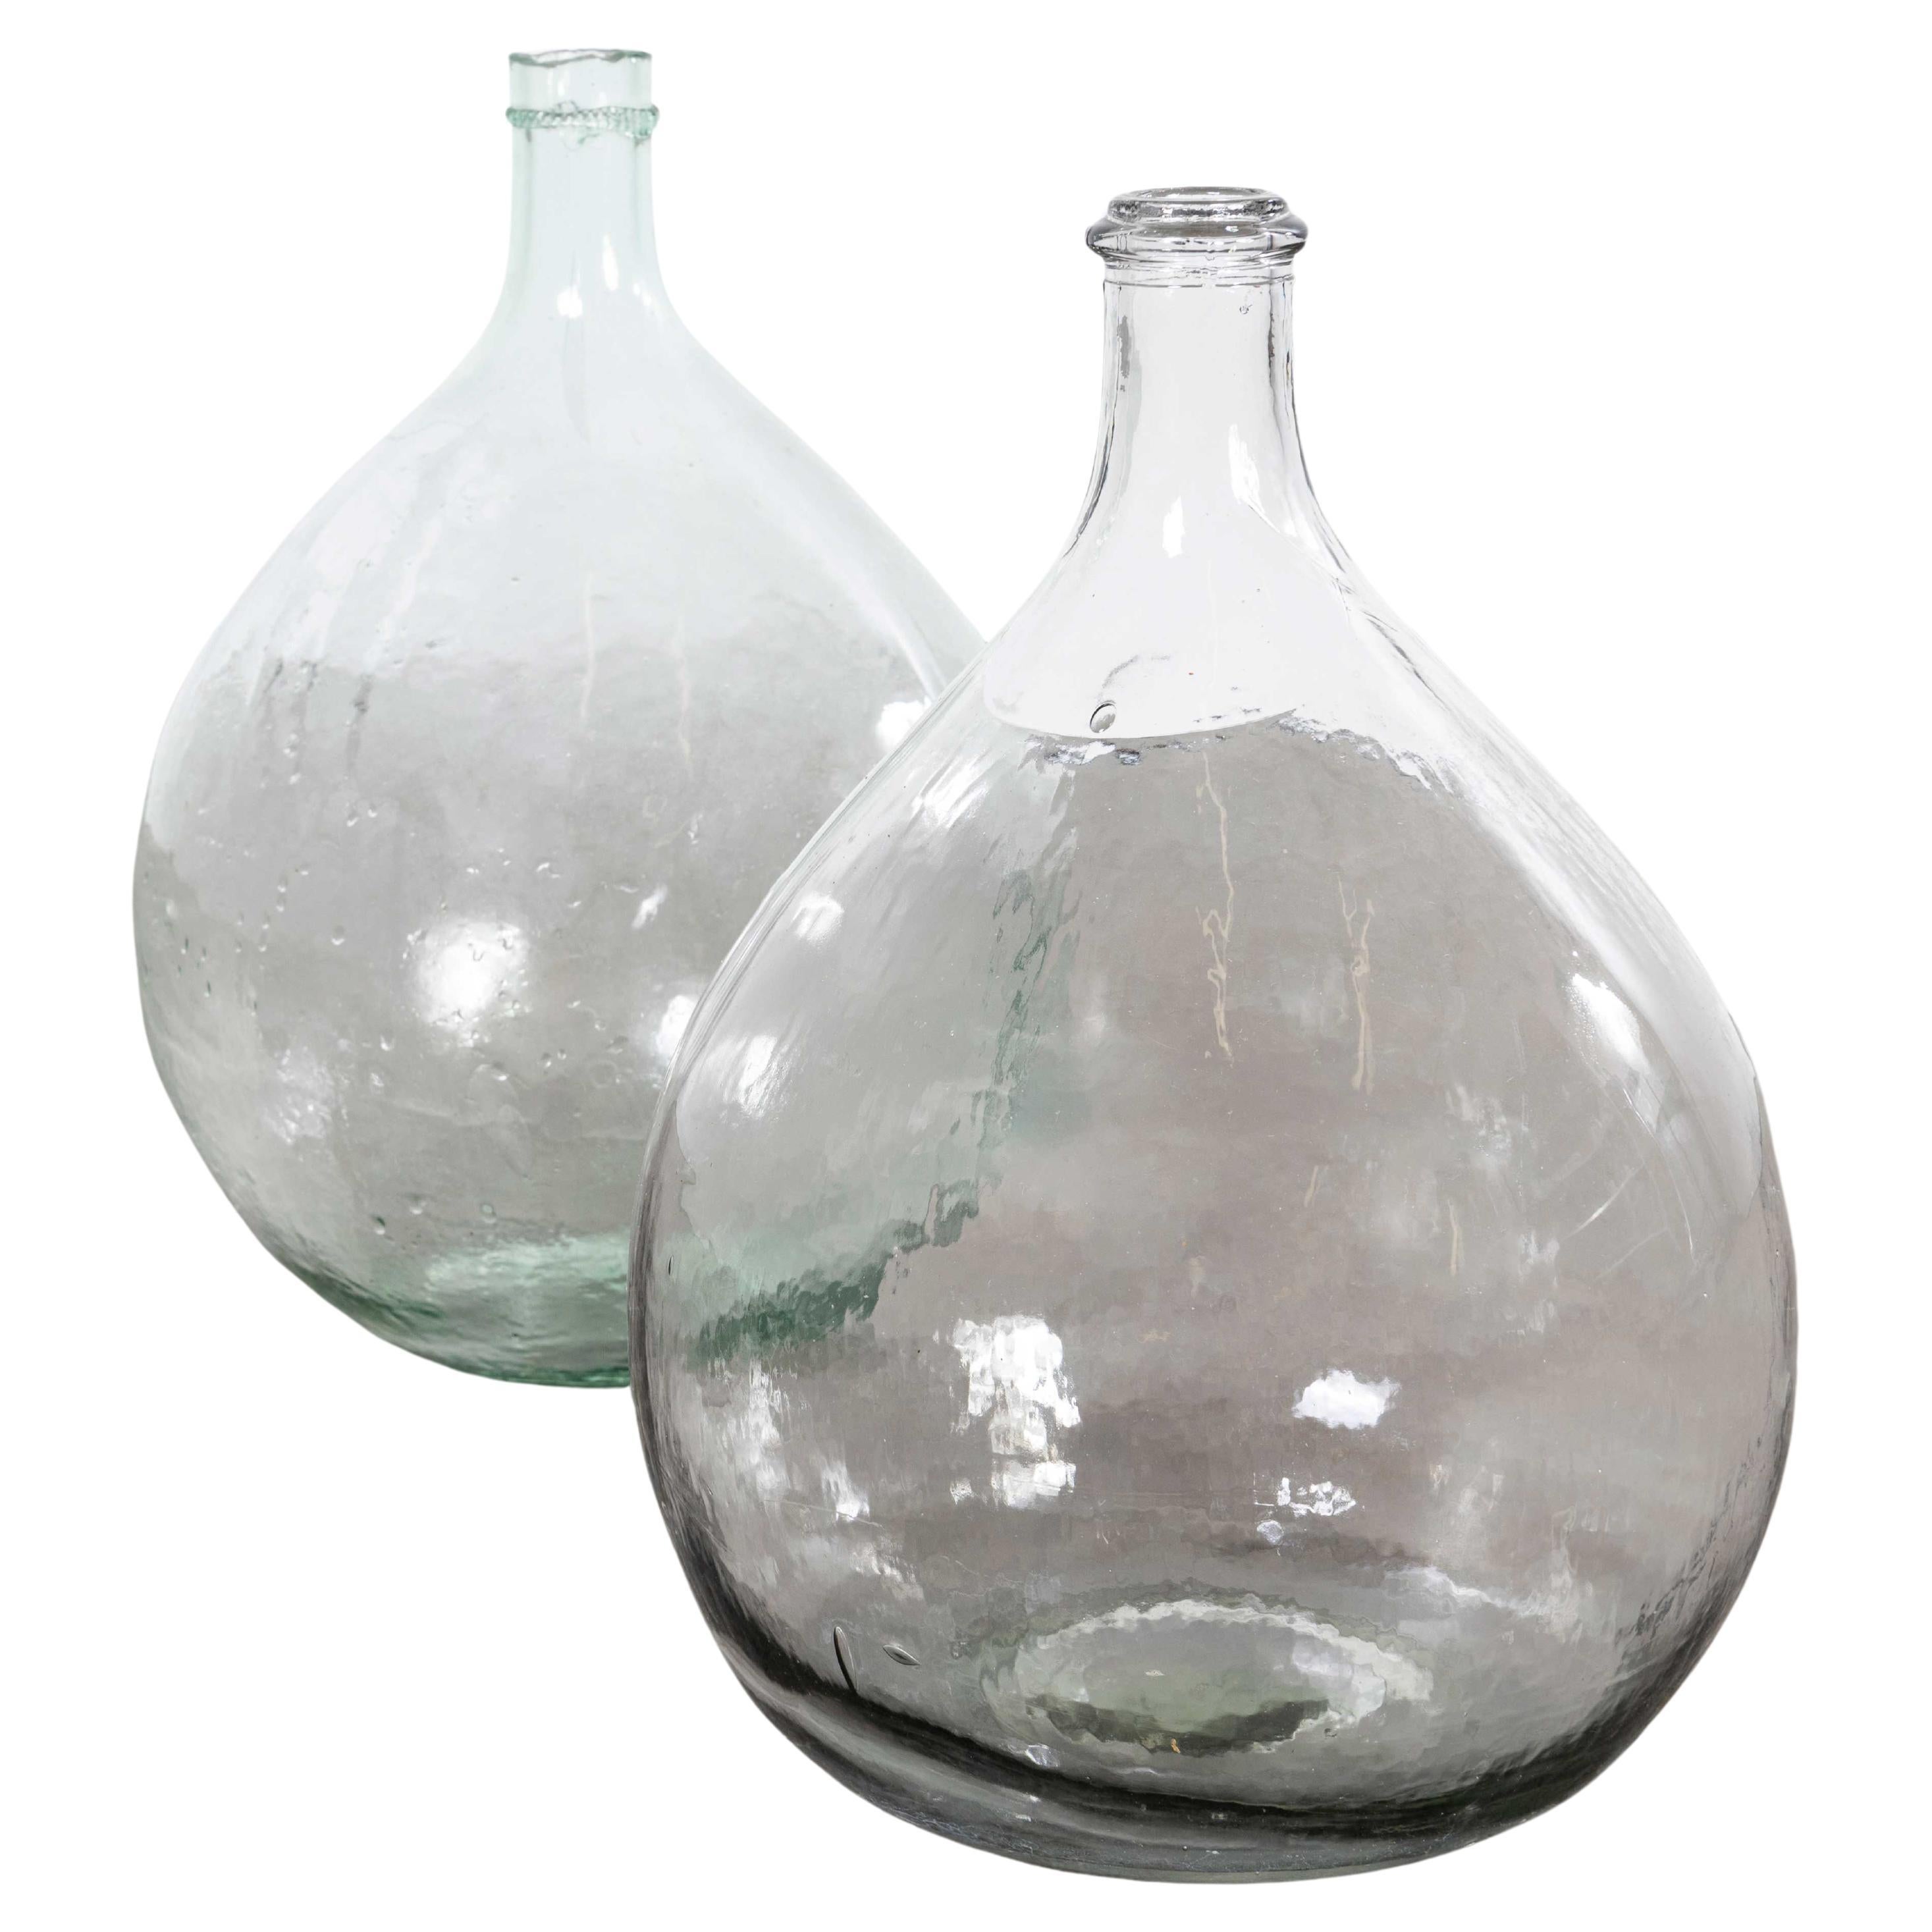 Vintage French Glass Demijohns - Pair (957.22)